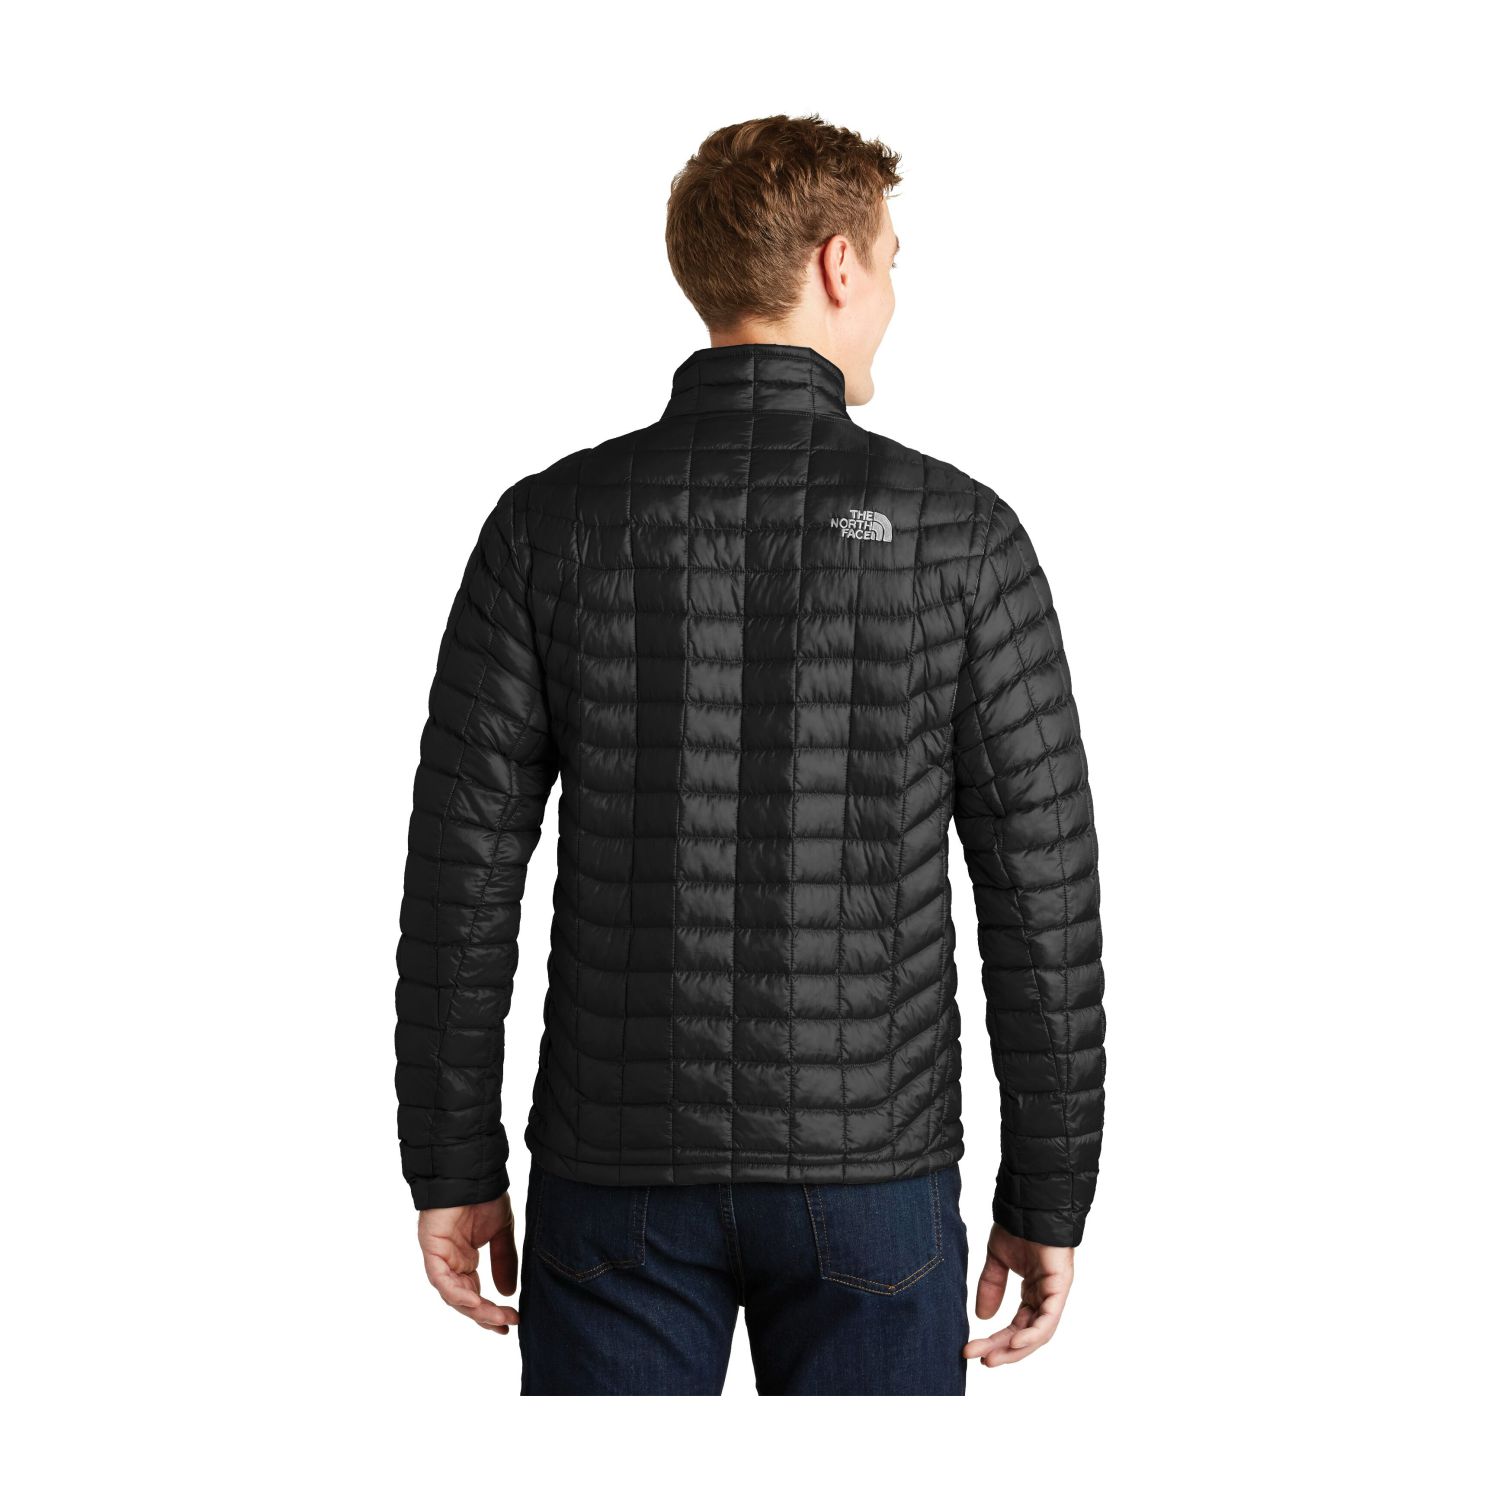 THE NORTH FACE THERMOBALL TREKKER JACKET #NF0A3LH2 Black Back